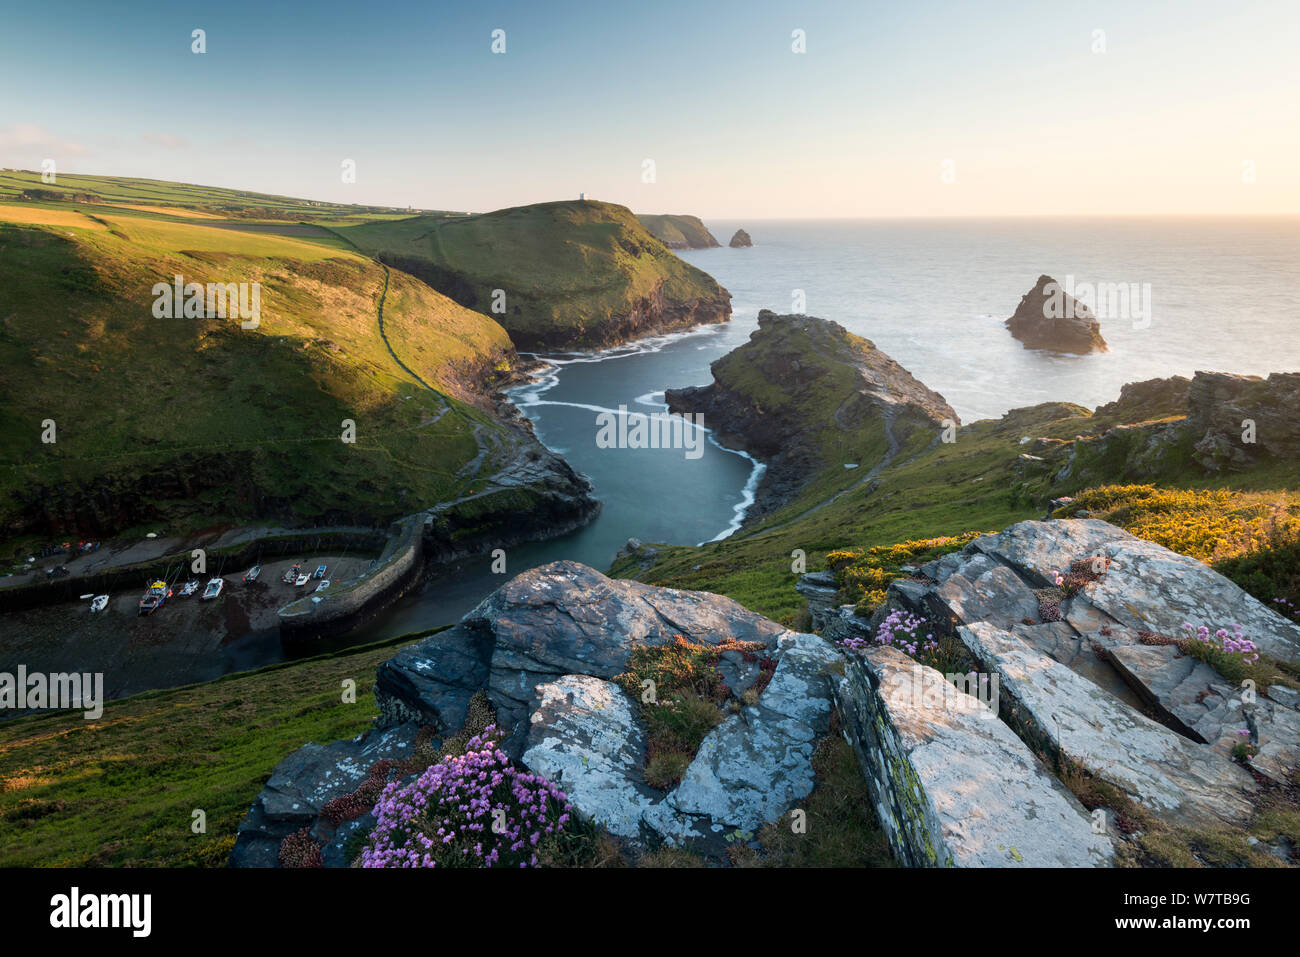 Boscastle harbour and coastline, evening light, Cornwall, UK, May 2013. Stock Photo